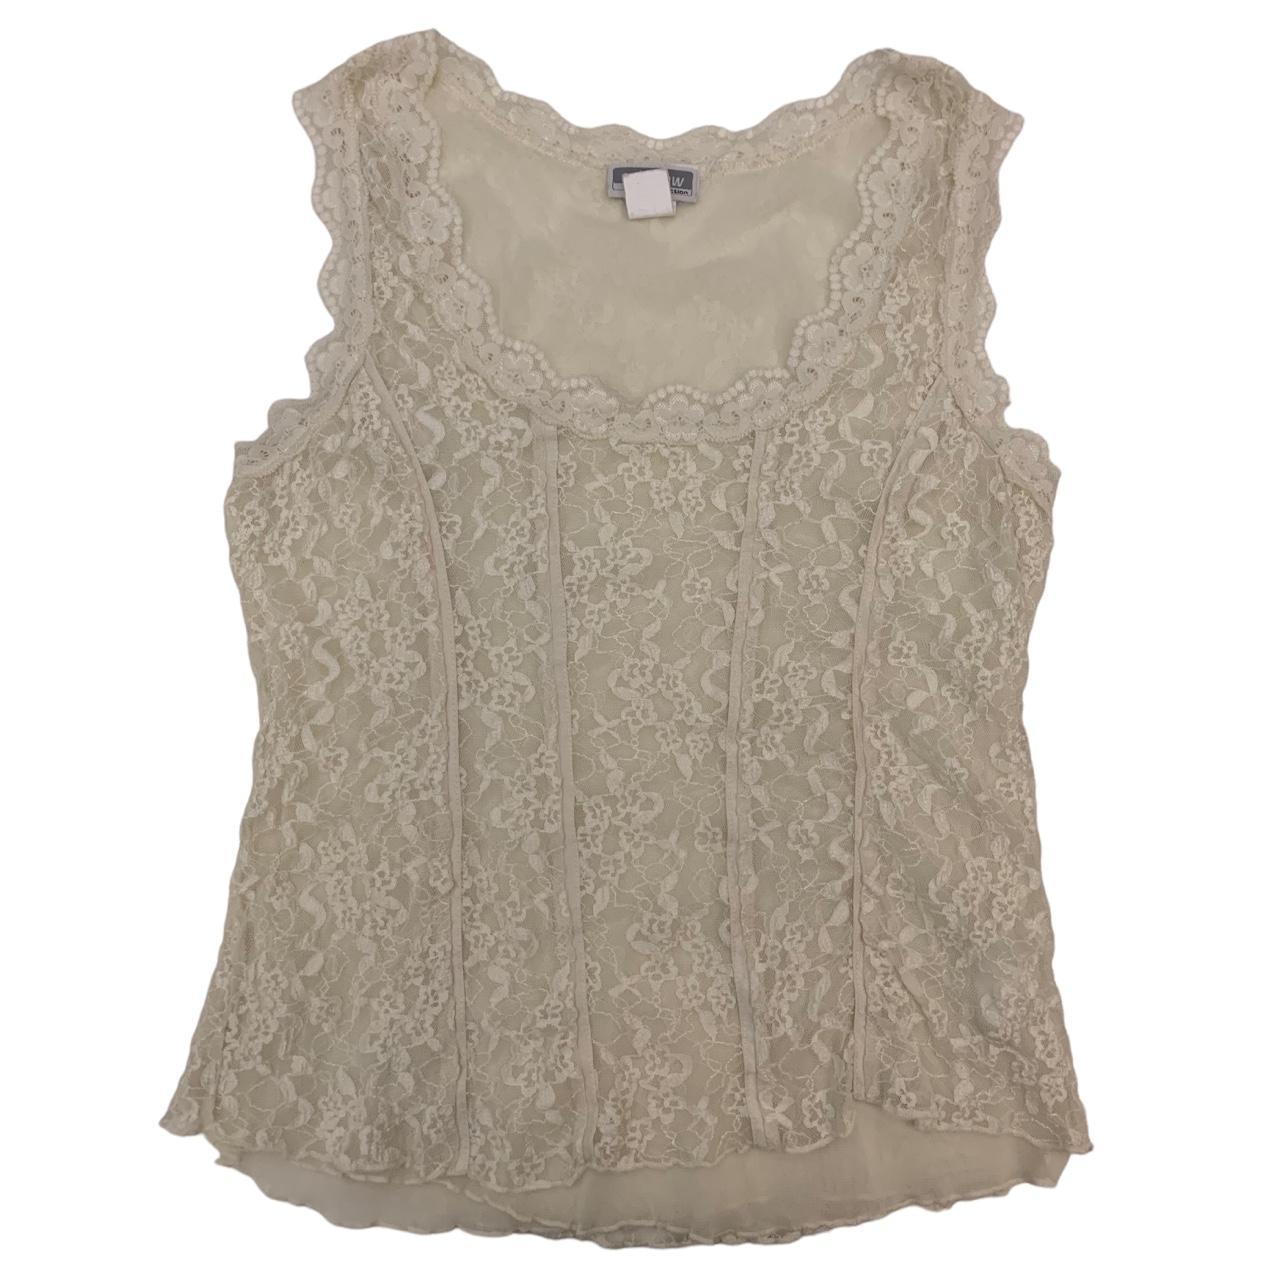 Y2k milkmaid cream white stretchy mesh lace overlay... - Depop